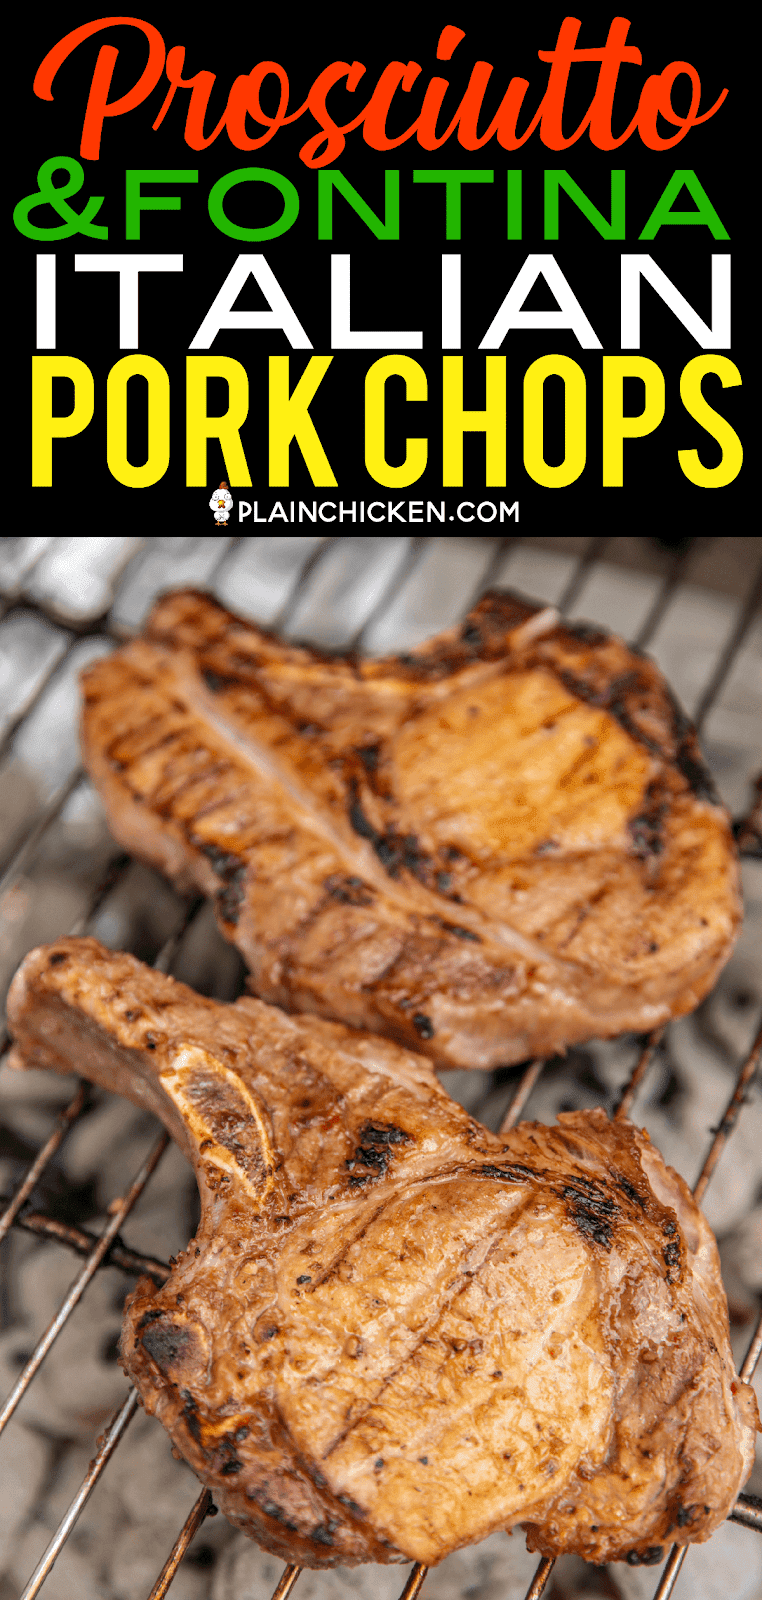 Prosciutto & Fontina Topped Italian Pork Chops - OMG! Better than any restaurant! These might be the BEST pork chops we've ever eaten! Pork chops marinated in Italian dressing and Worcestershire sauce then grilled and topped with prosciutto and Fontina cheese. Pork on pork with cheese! YUM! SO simple and they taste AMAZING! #porkchop #grilling